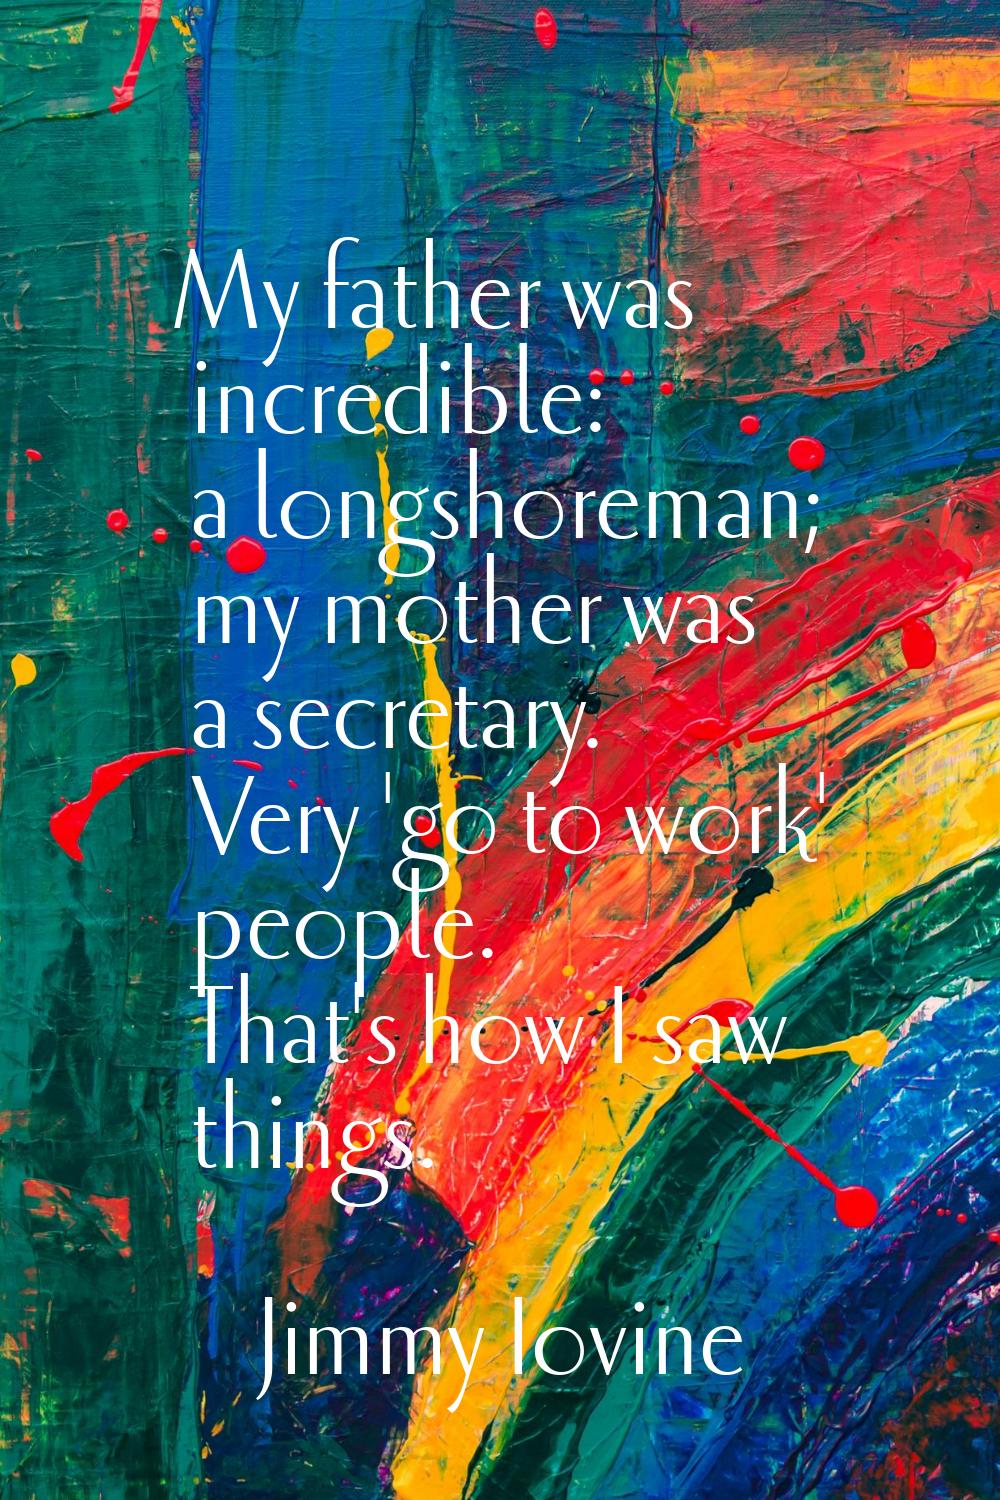 My father was incredible: a longshoreman; my mother was a secretary. Very 'go to work' people. That